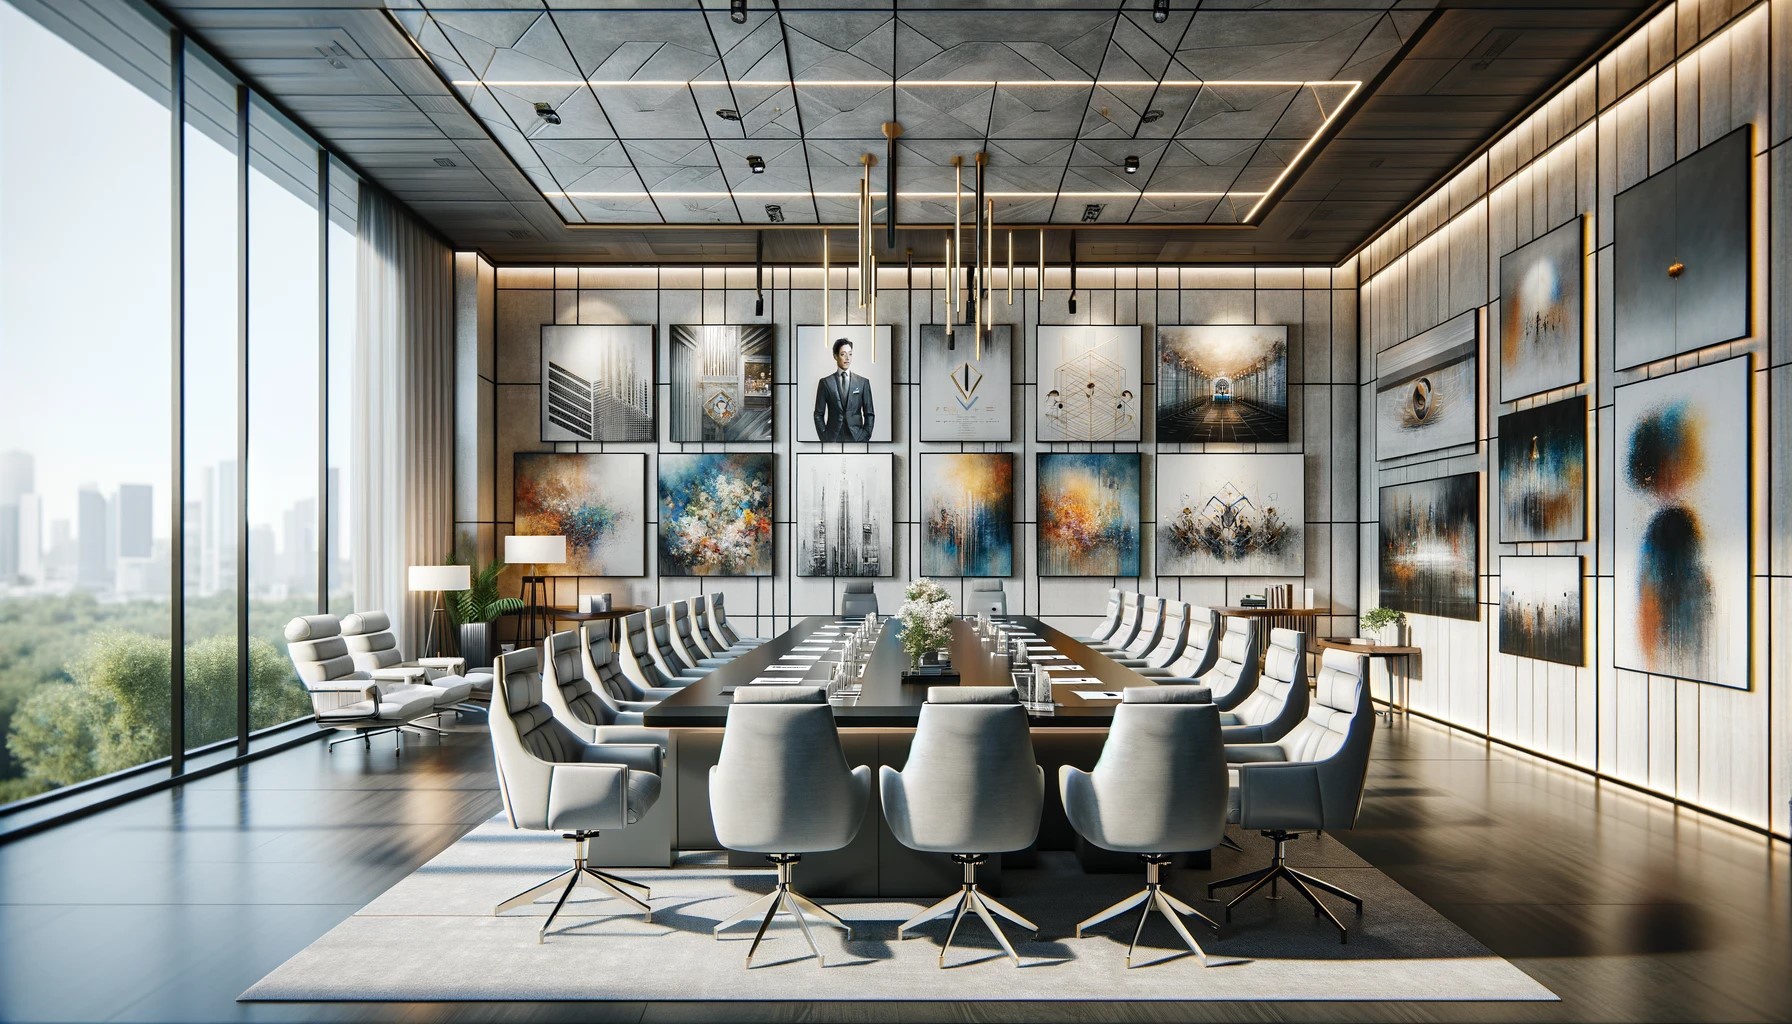 the image showcases a contemporary corporate boardroom, enriched with a diverse range of art pieces that enhance the room's aesthetic and reflect the company's identity and values.